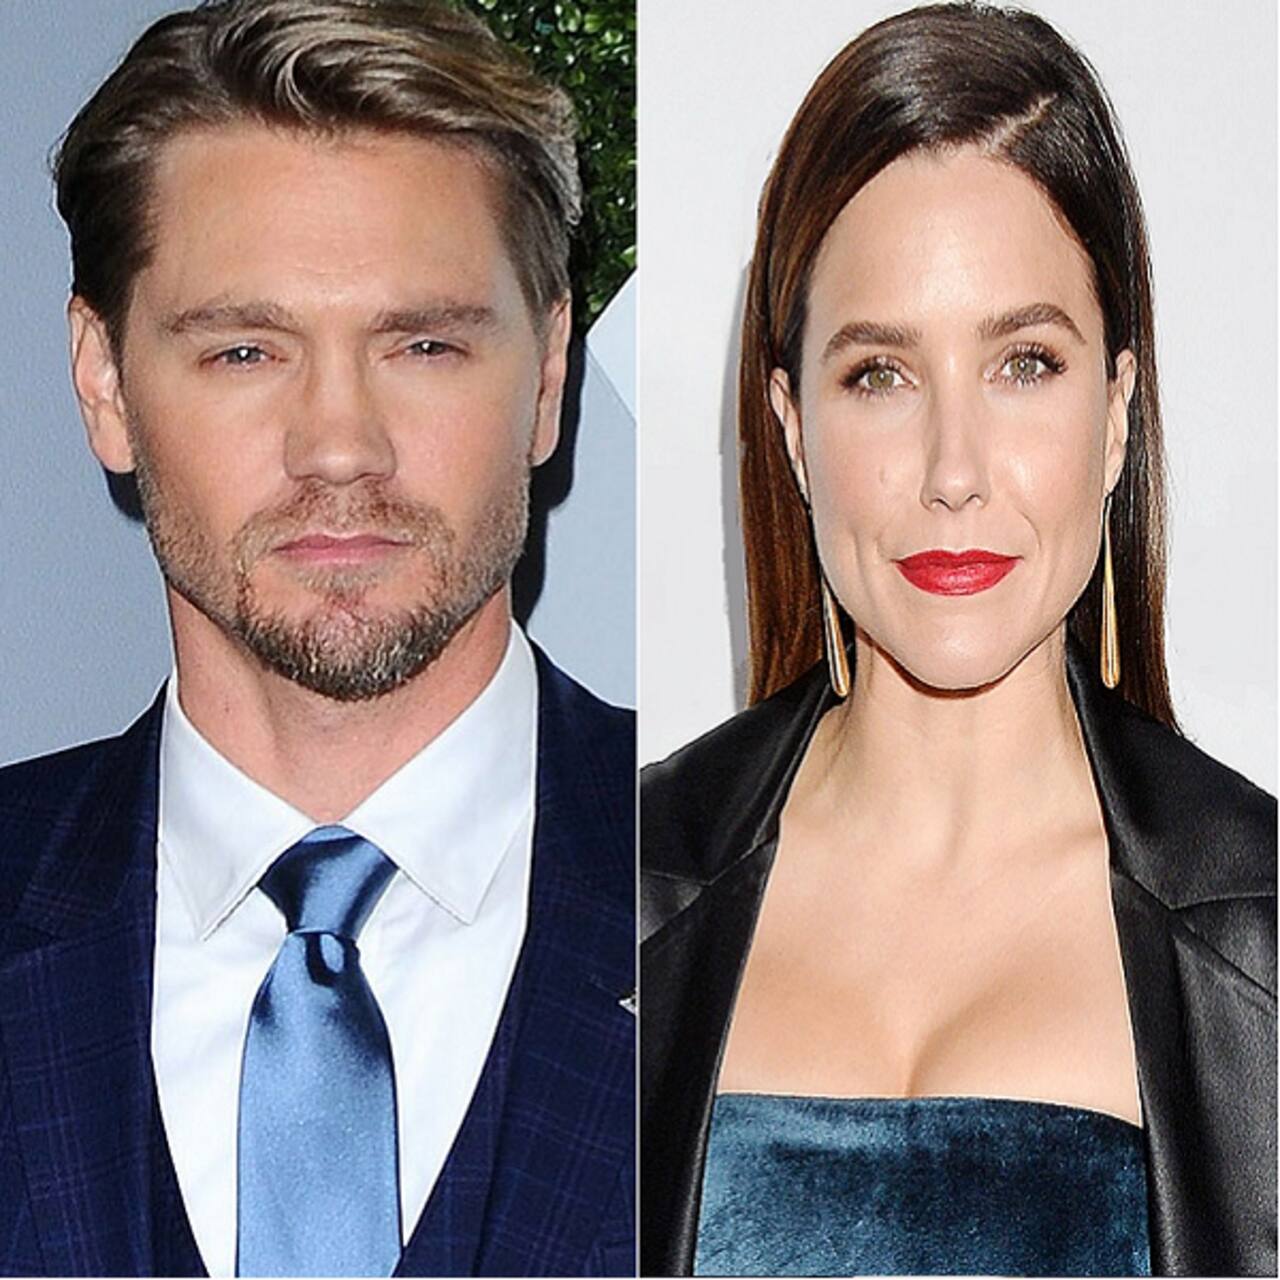 Sophia Bush says producers of One Tree Hill were ‘deeply inappropriate’ post her split with ex-husband Chad Michael Murray